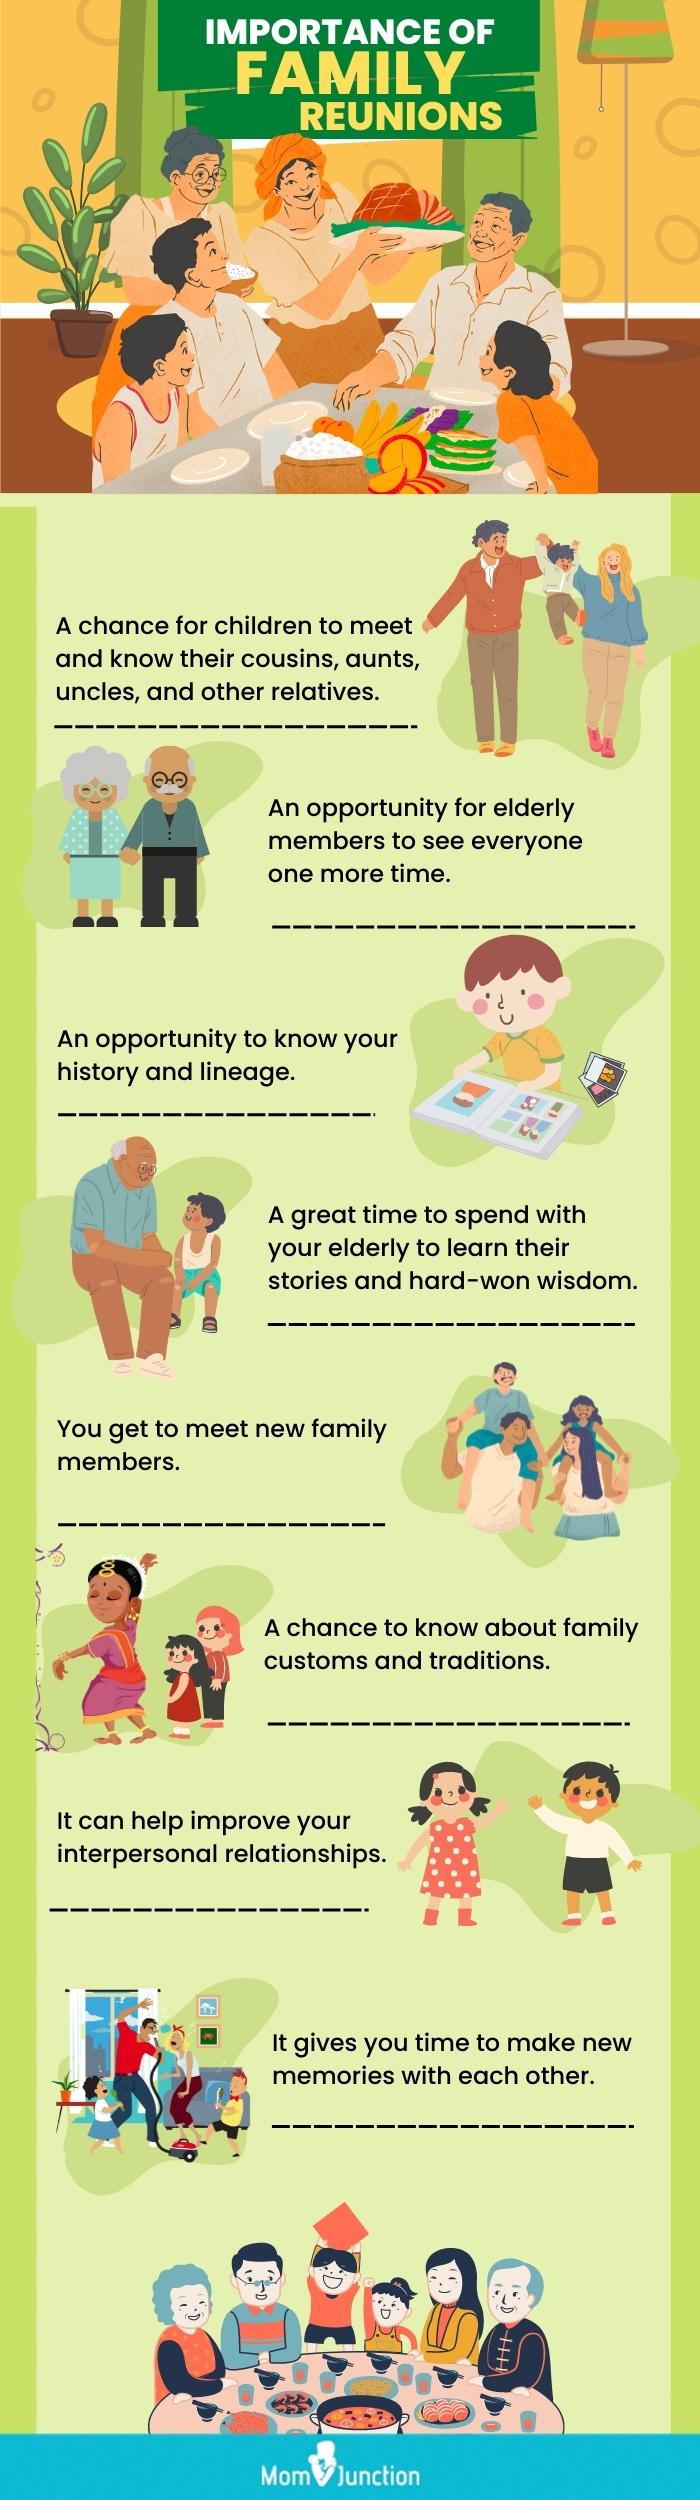 importance of family reunions (infographic)